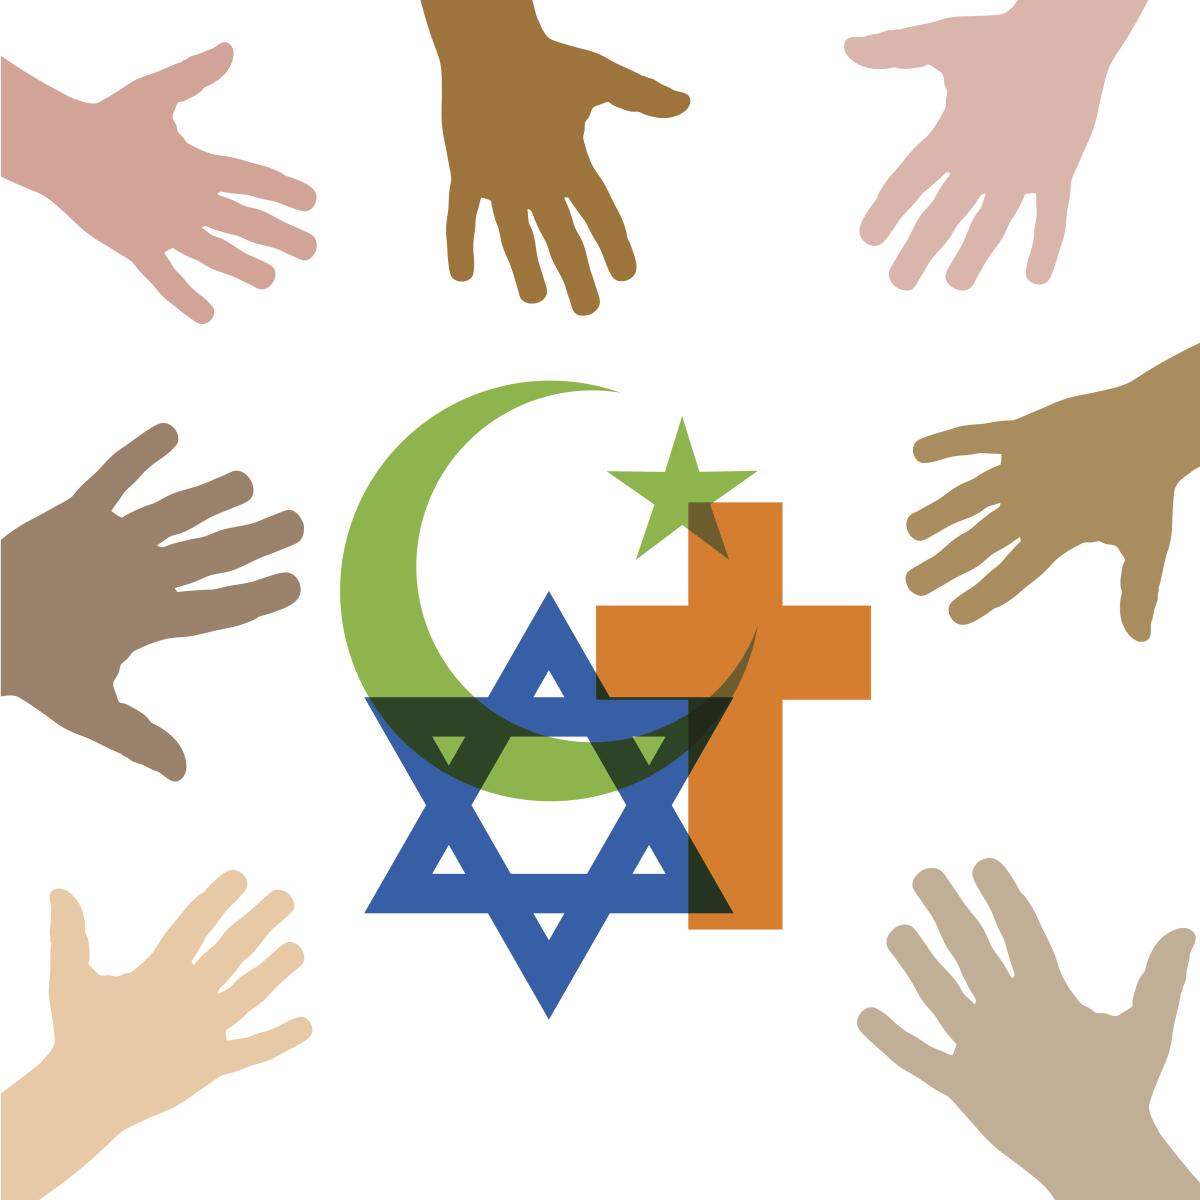 Peace and dialogue between religions. Christian symbols, jew and Islamic